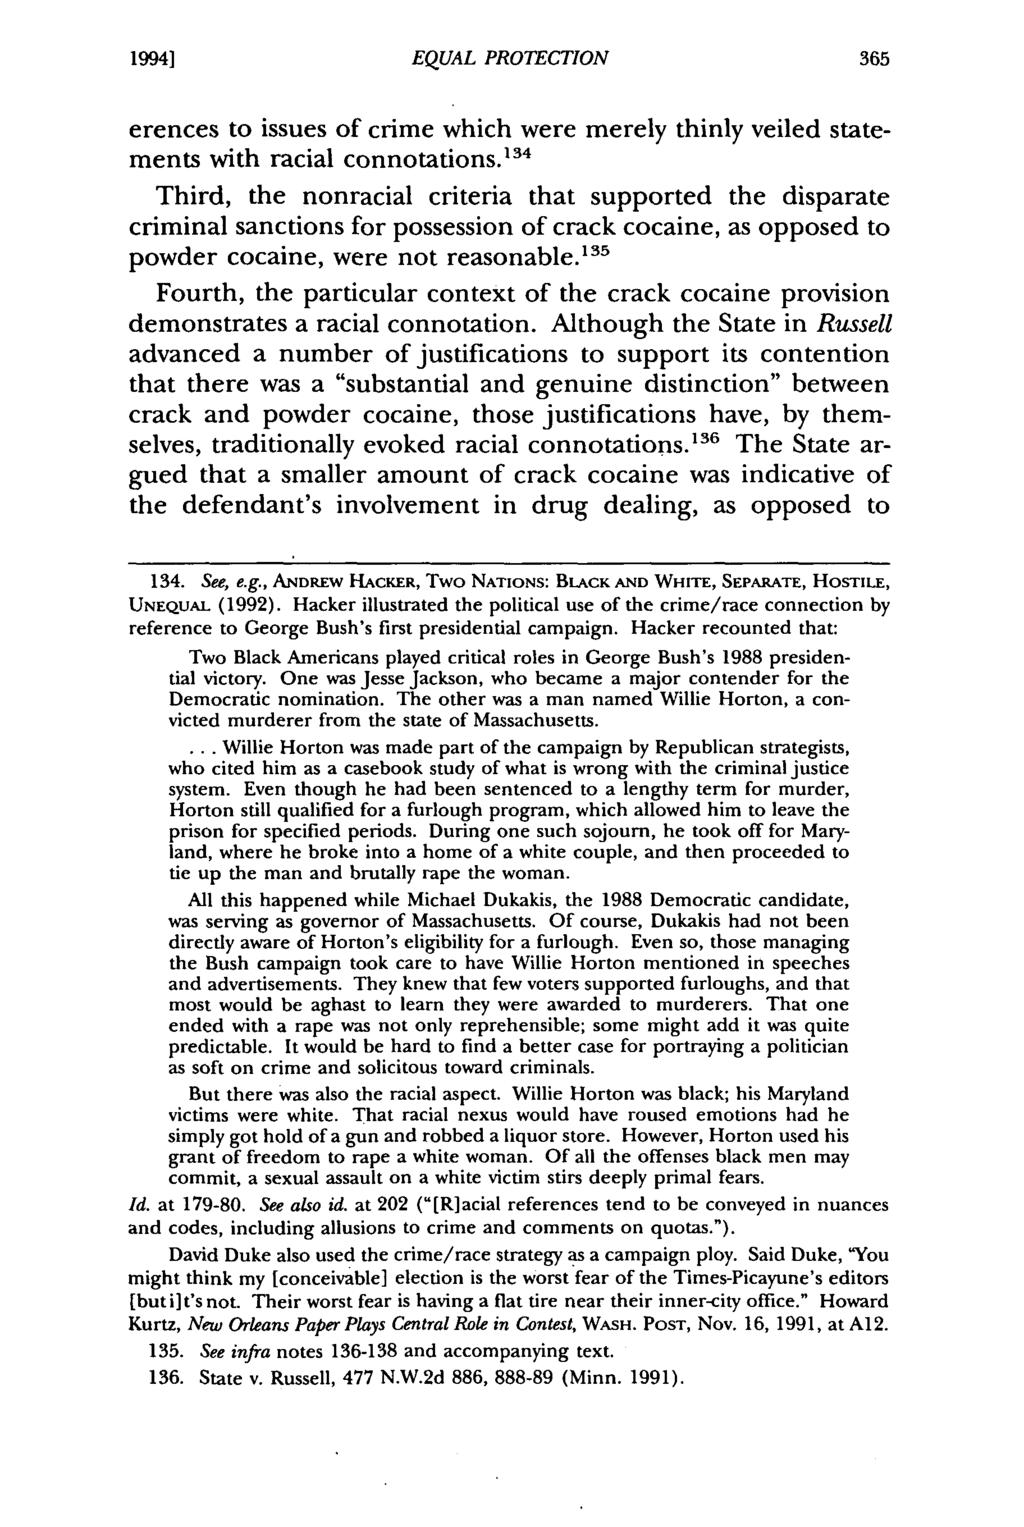 19941 Iijima: Minnesota Equal Protection EQUAL PROTECTION in the Third Millennium: "Old Formulat erences to issues of crime which were merely thinly veiled statements with racial connotations.